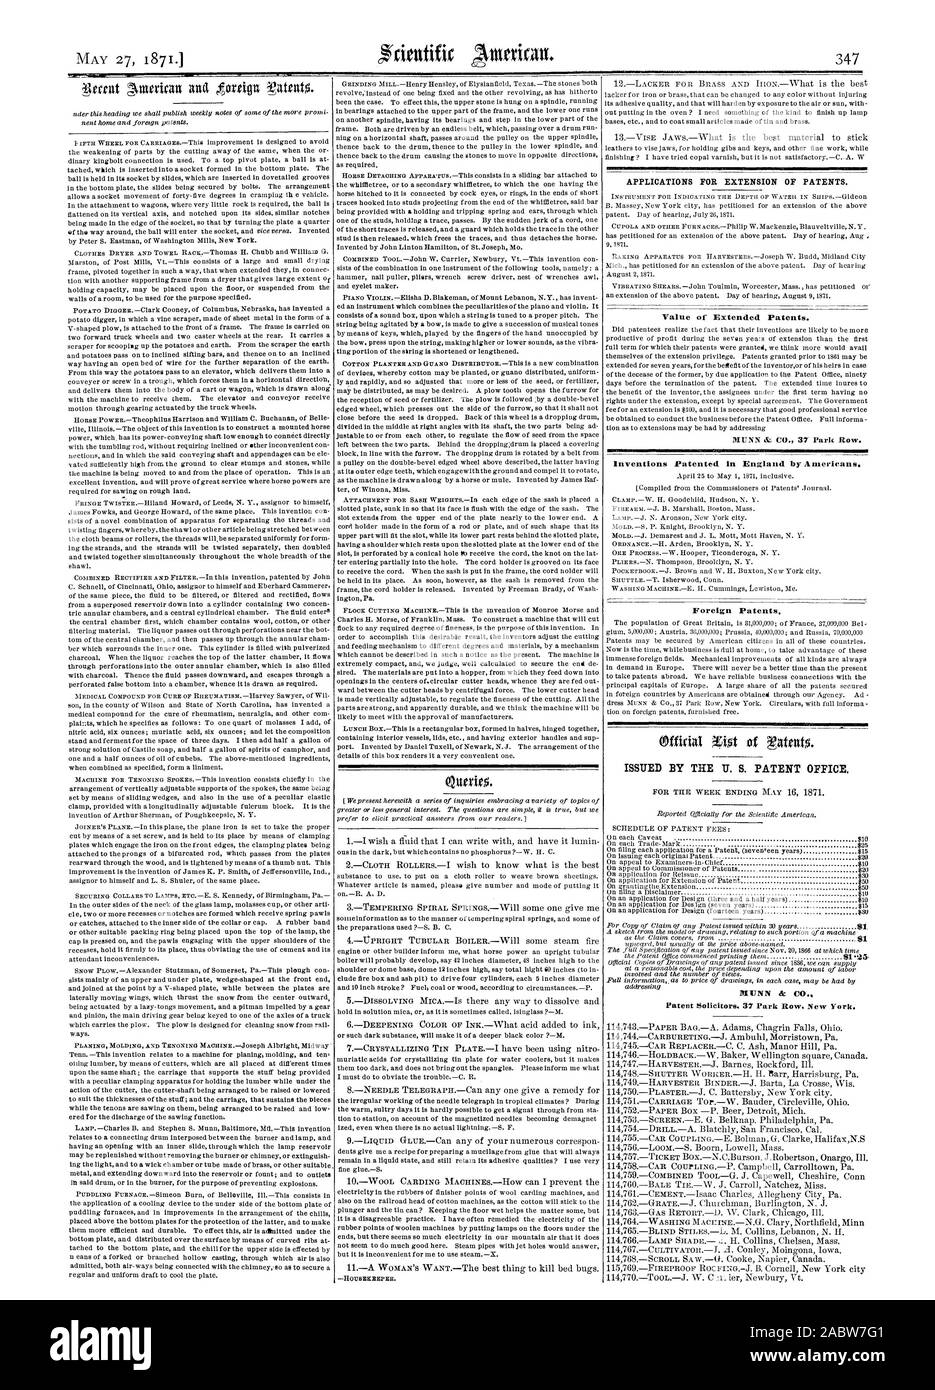 APPLICATIONS FOR EXTENSION OF PATENTS. Value of Extended Patents. MUNN & CO. 37 Park Row. Inventions Patented in England by Americans. Foreign Patents, scientific american, 1871-05-27 Stock Photo